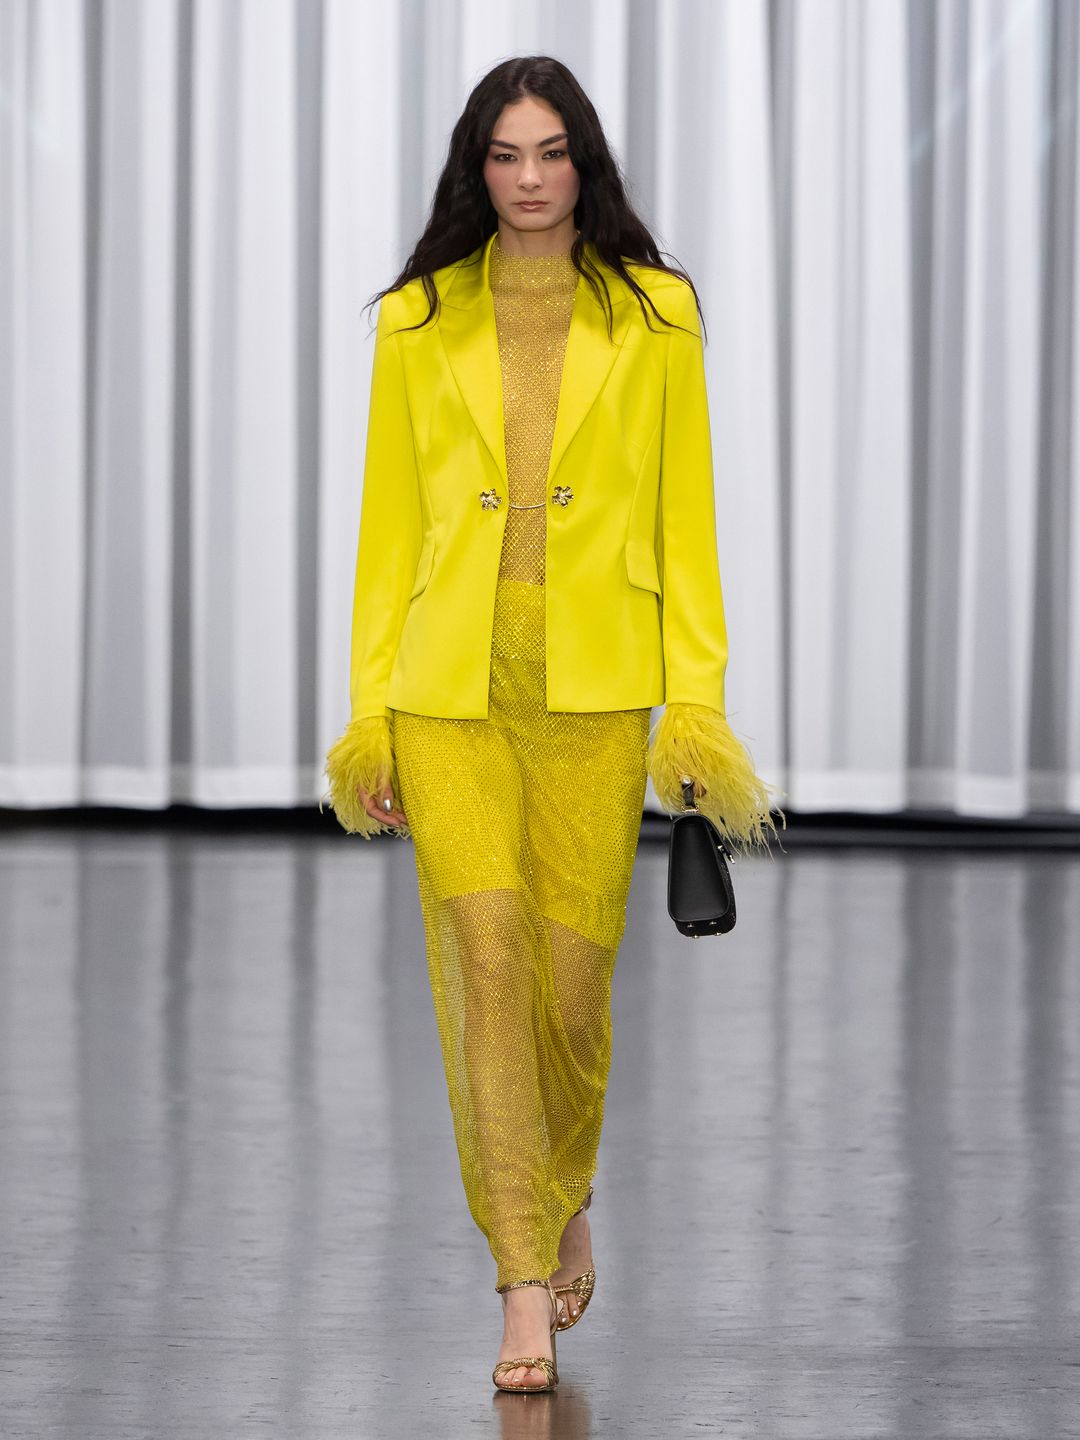 Marc Cain sends a model downt he cat walk in a all-yellow crystal encrusted sheer maxi dress with feather cuffs and a matching blazer